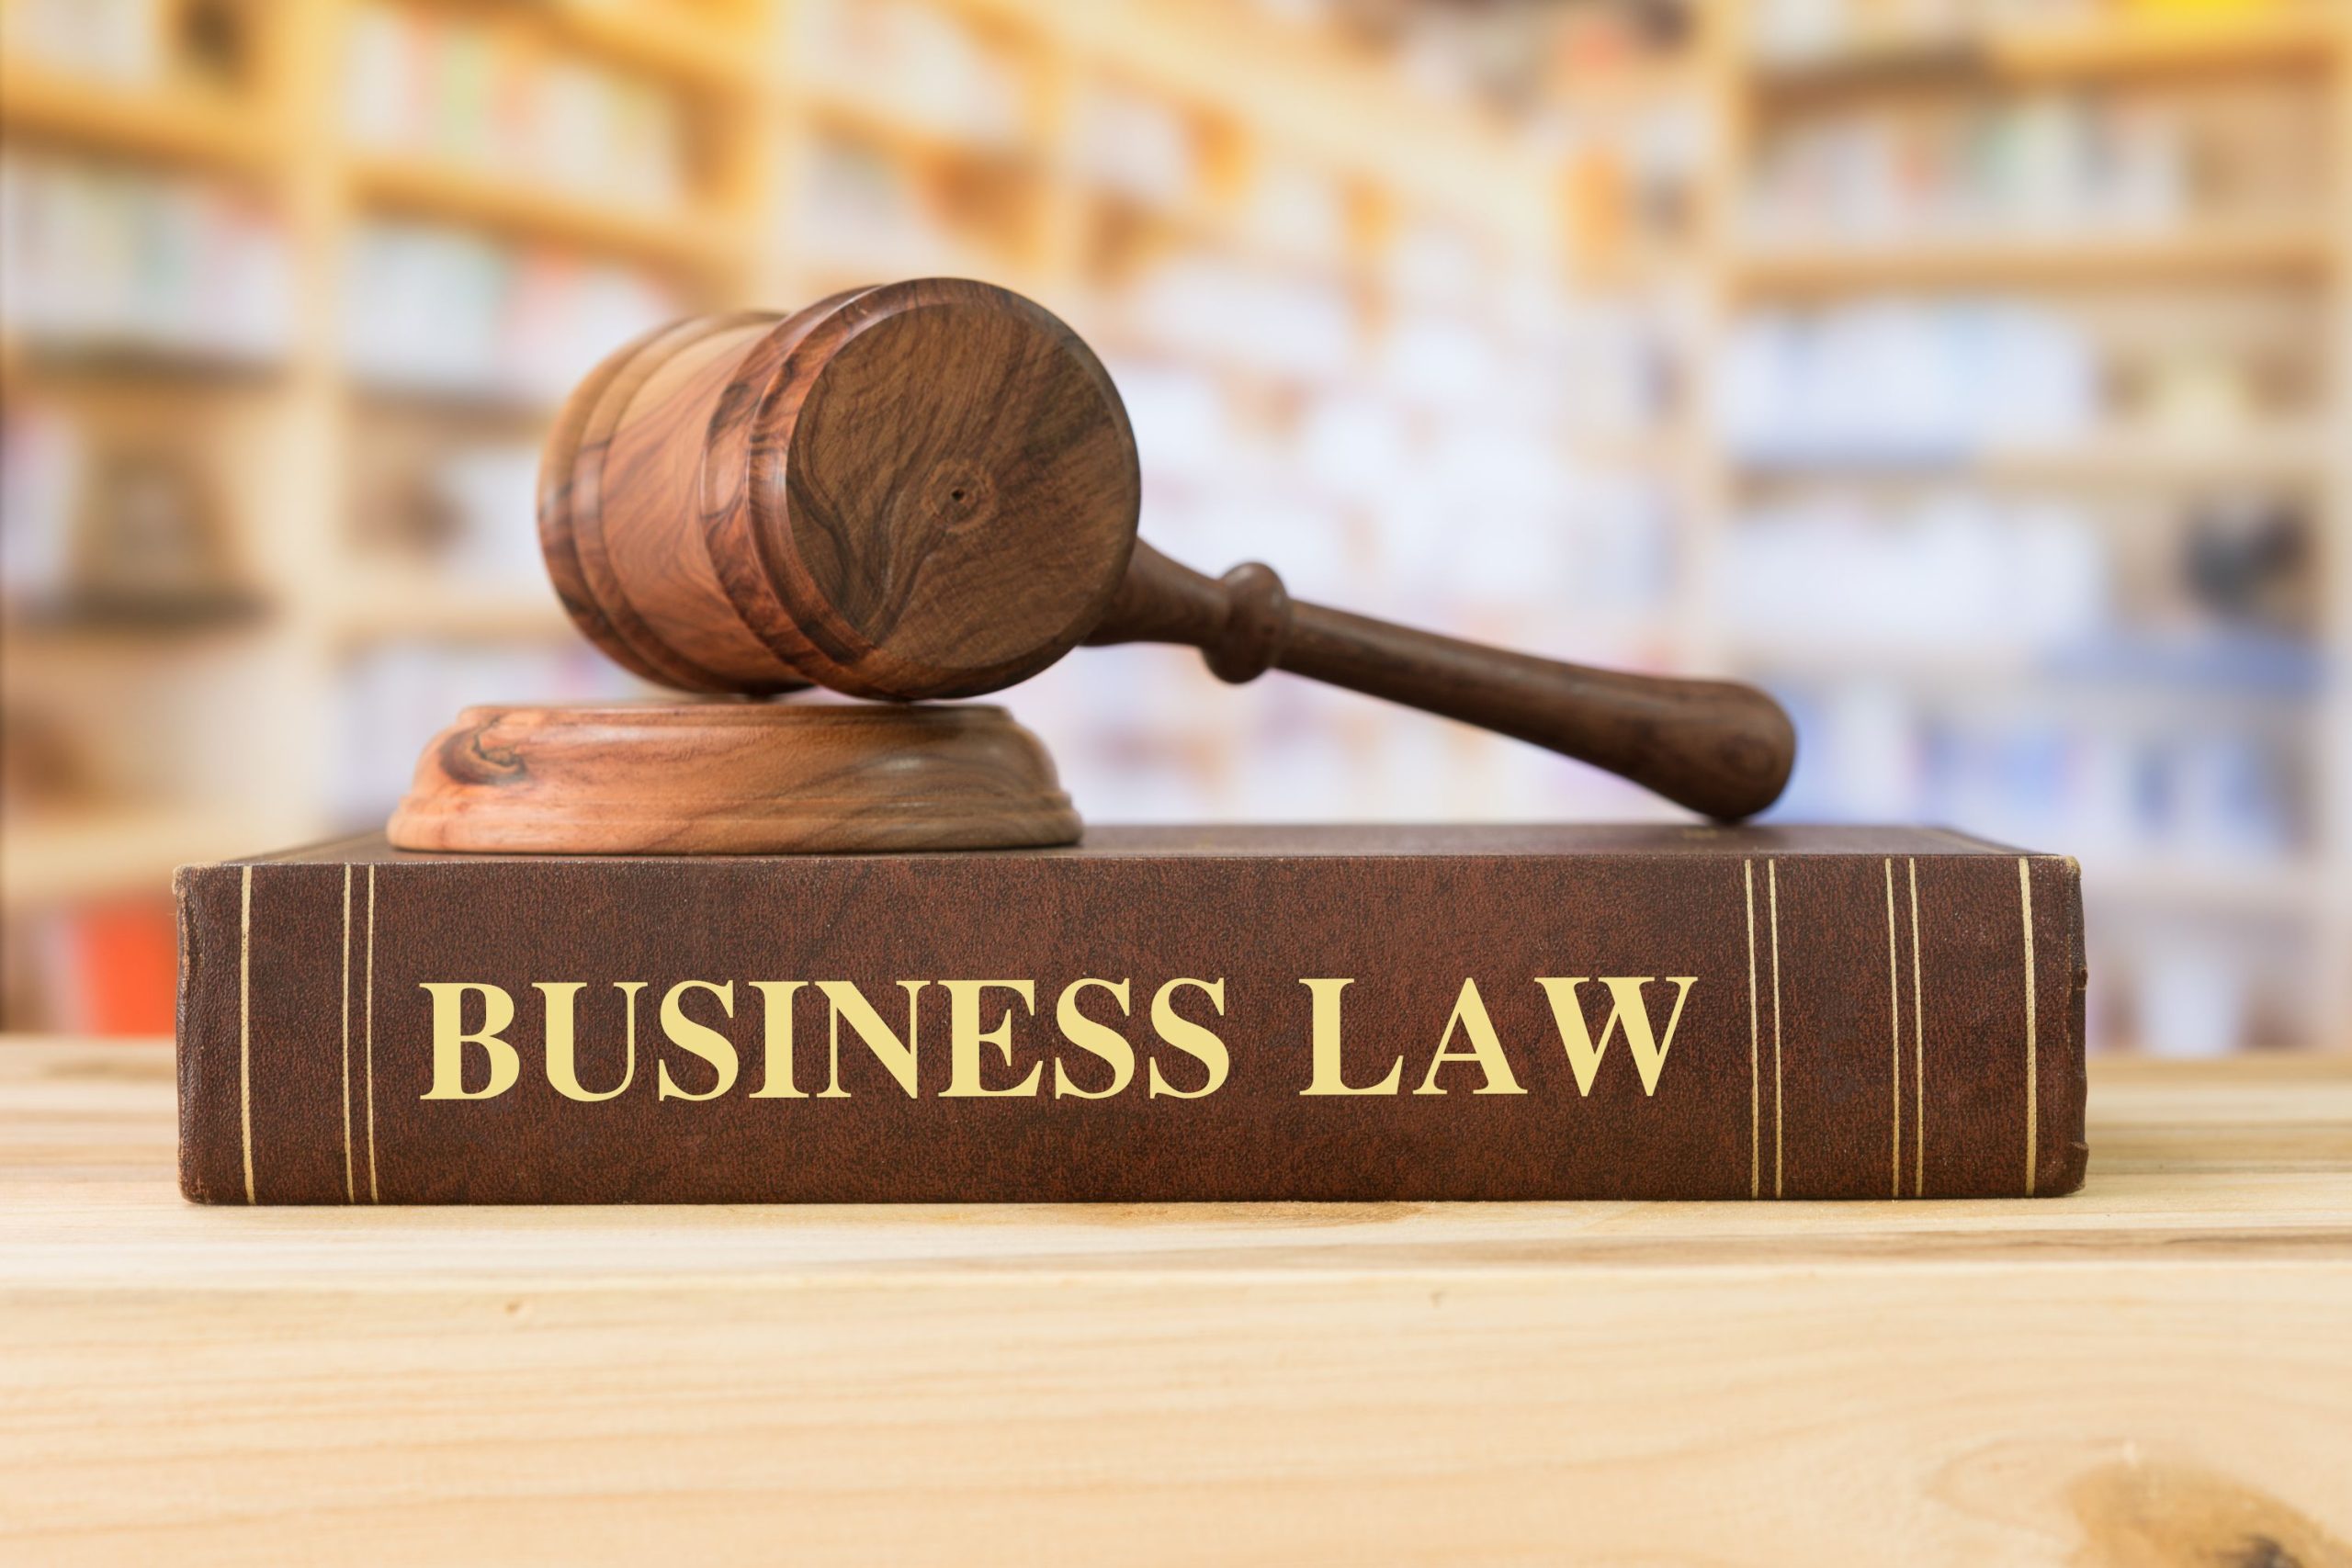 Business law attorney: purpose and function